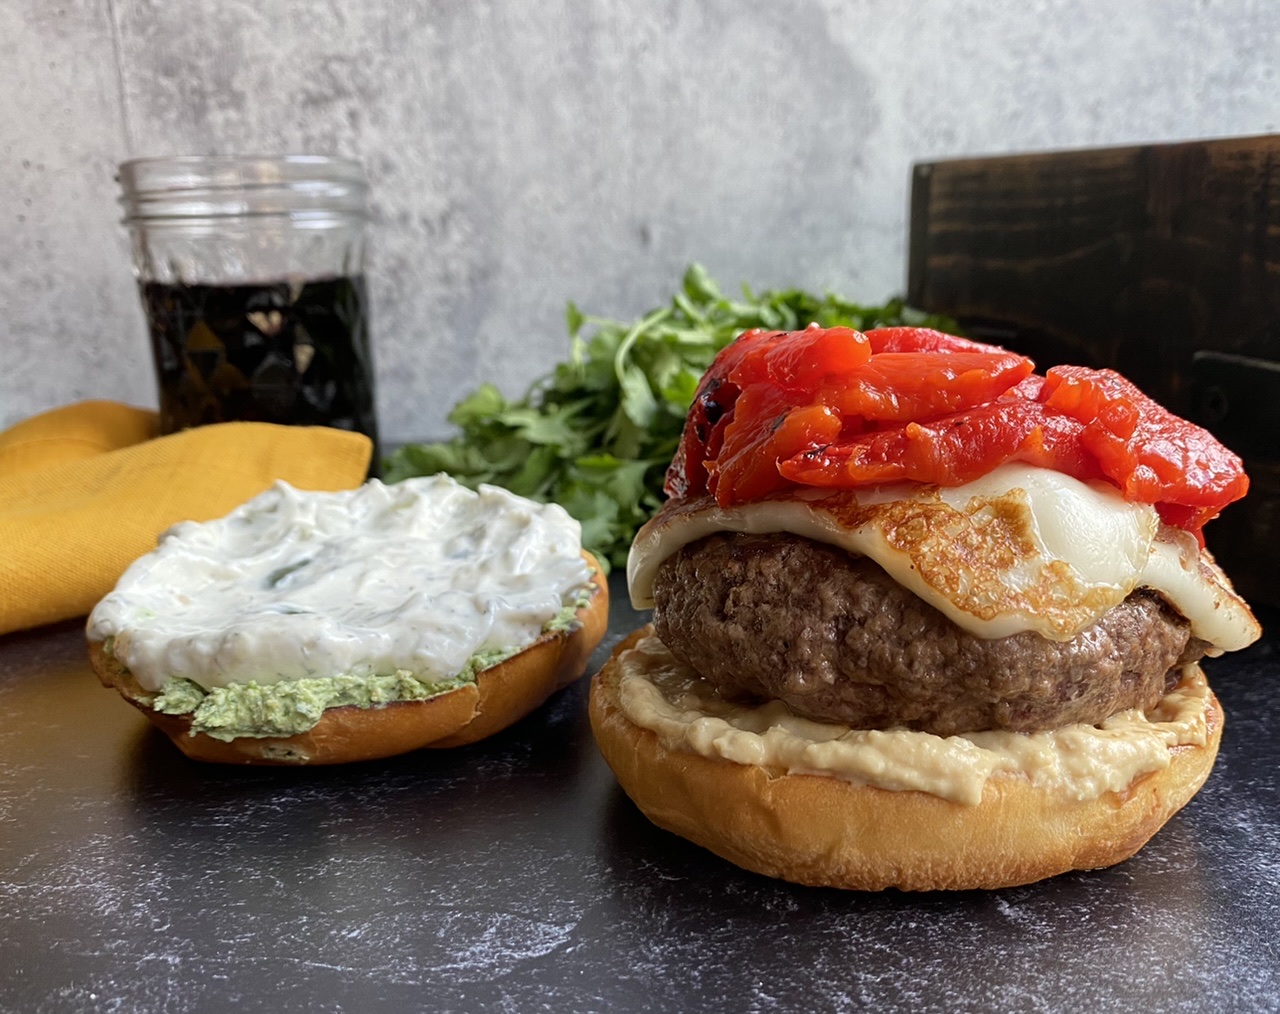 06AC5603 A478 437C 81BC C2E9FC8F5DA4 - Mediterranean Burgers with Fried Halloumi, Roasted Red Peppers, Tzatziki, & Garlic Hummus with a Cilantro Goat Cheese Spread